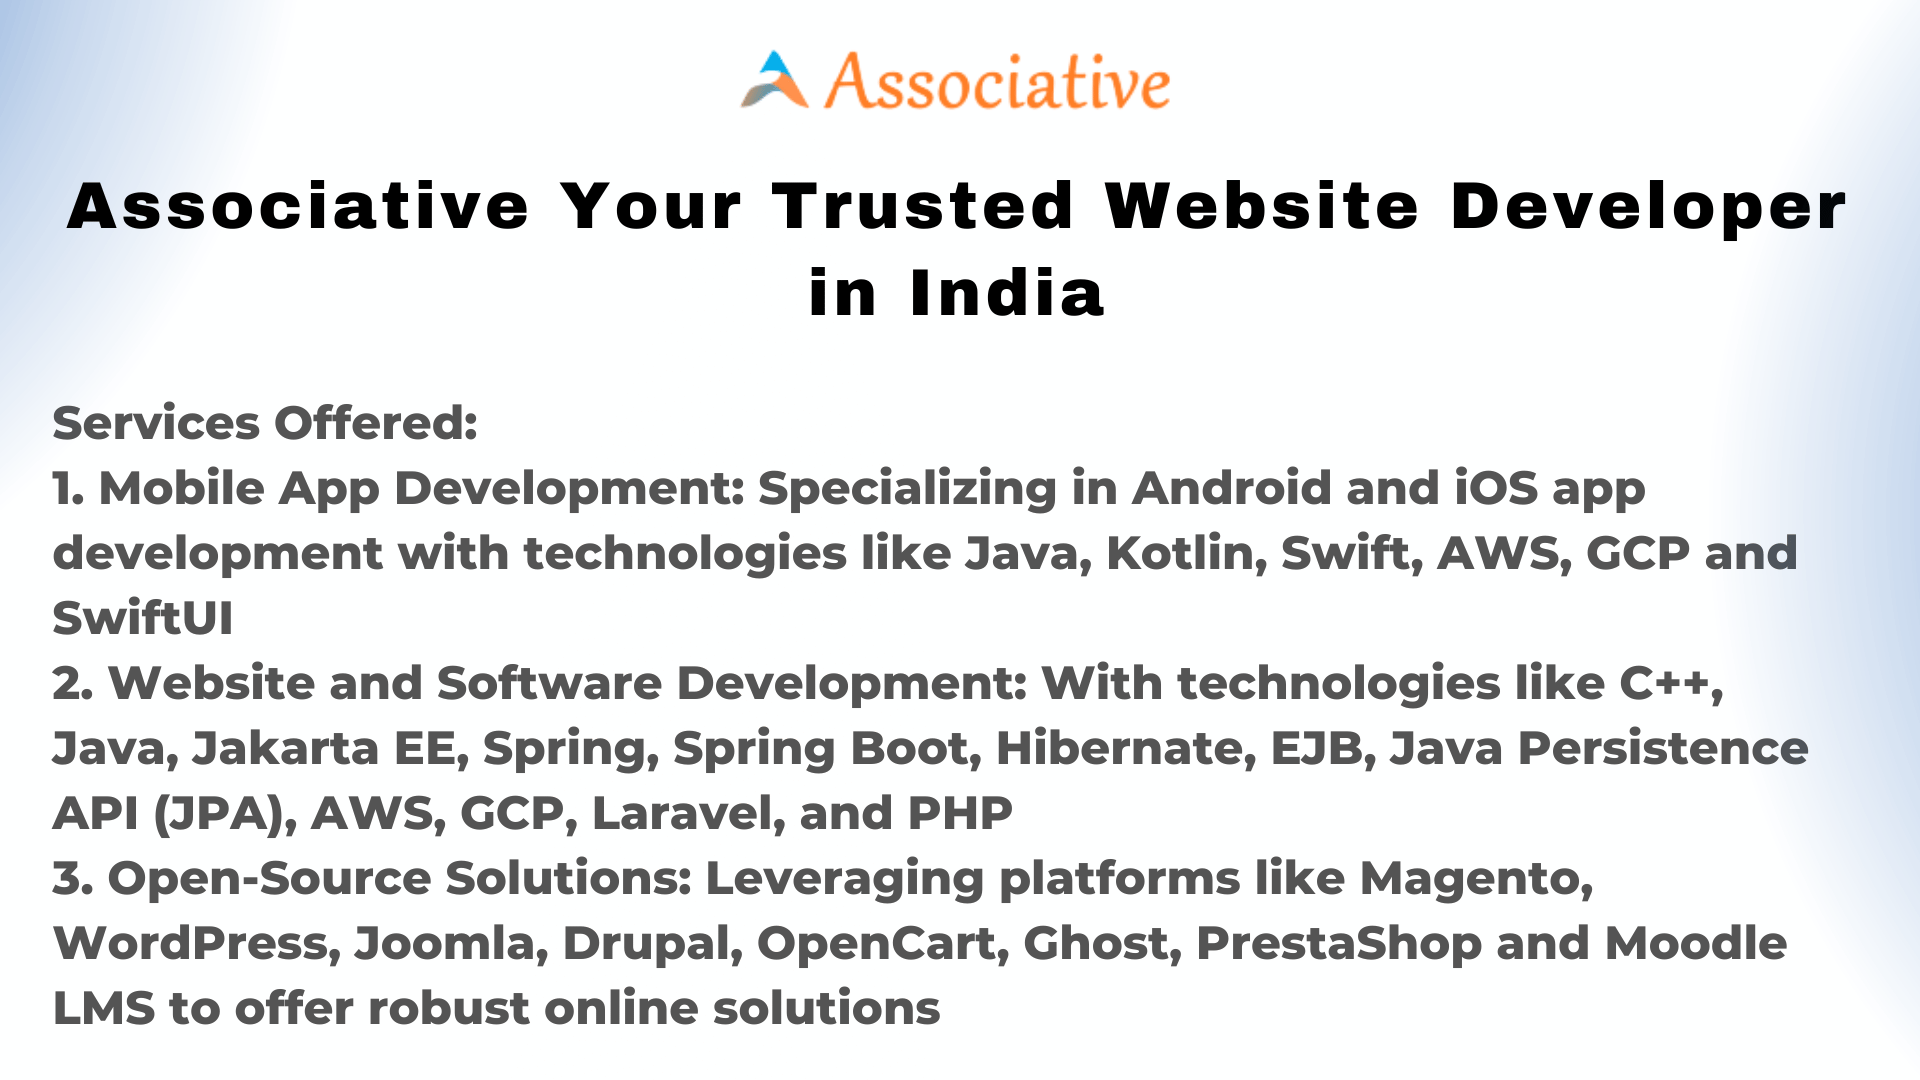 Associative Your Trusted Website Developer in India